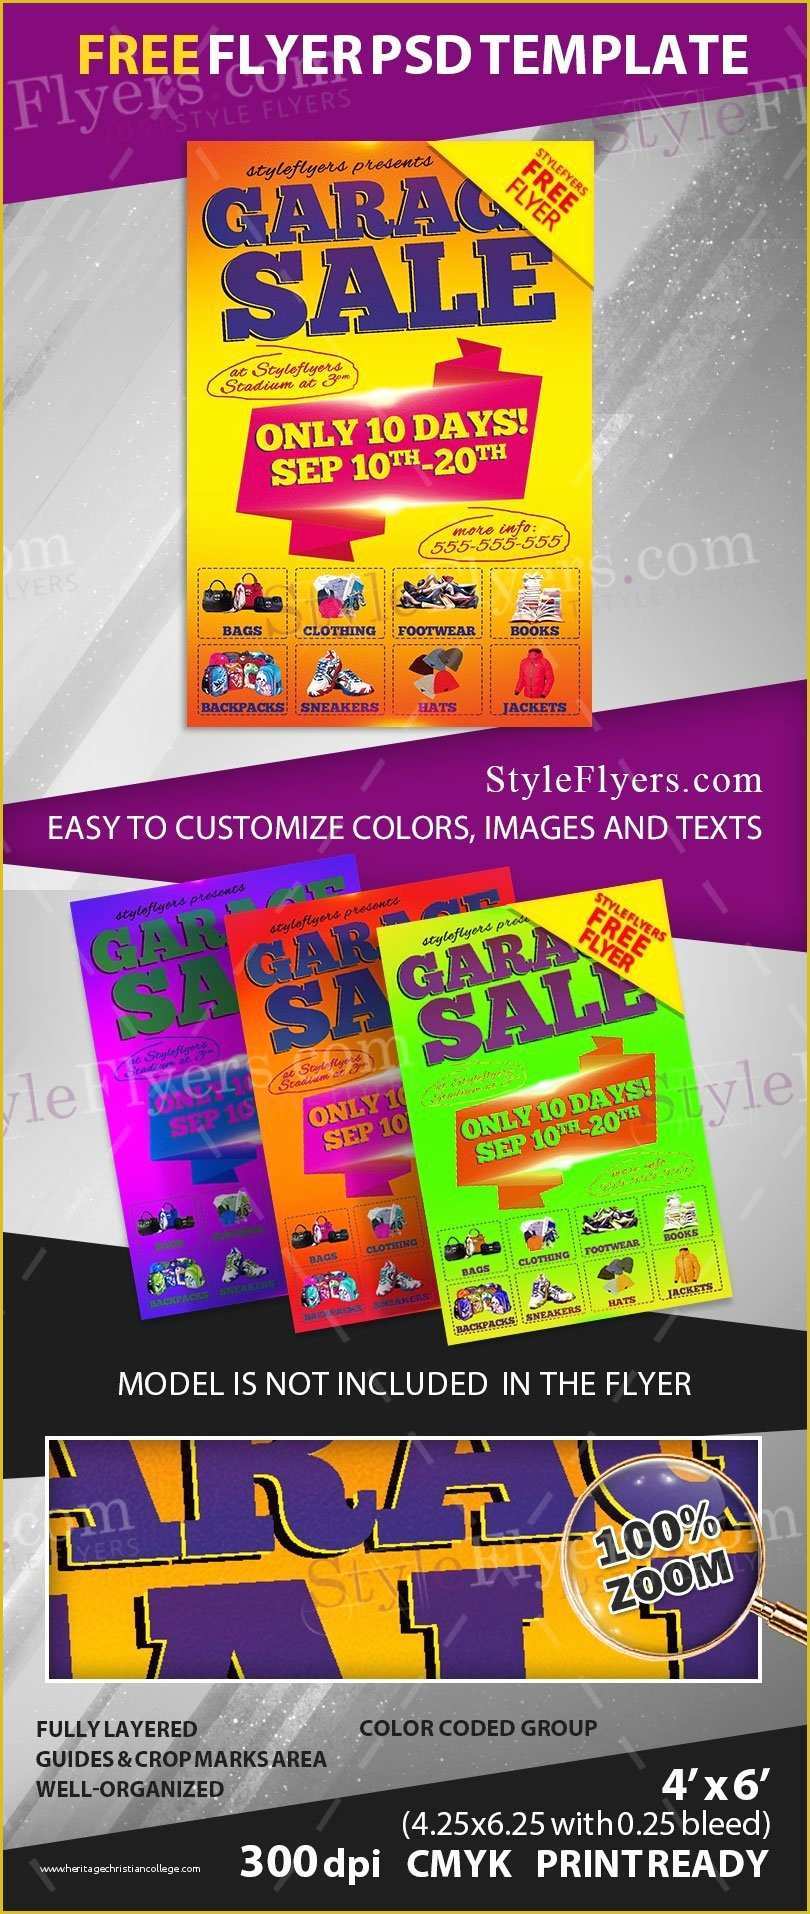 For Sale Flyer Template Free Download Of Garage Sale Free Psd Flyer Template Free Download